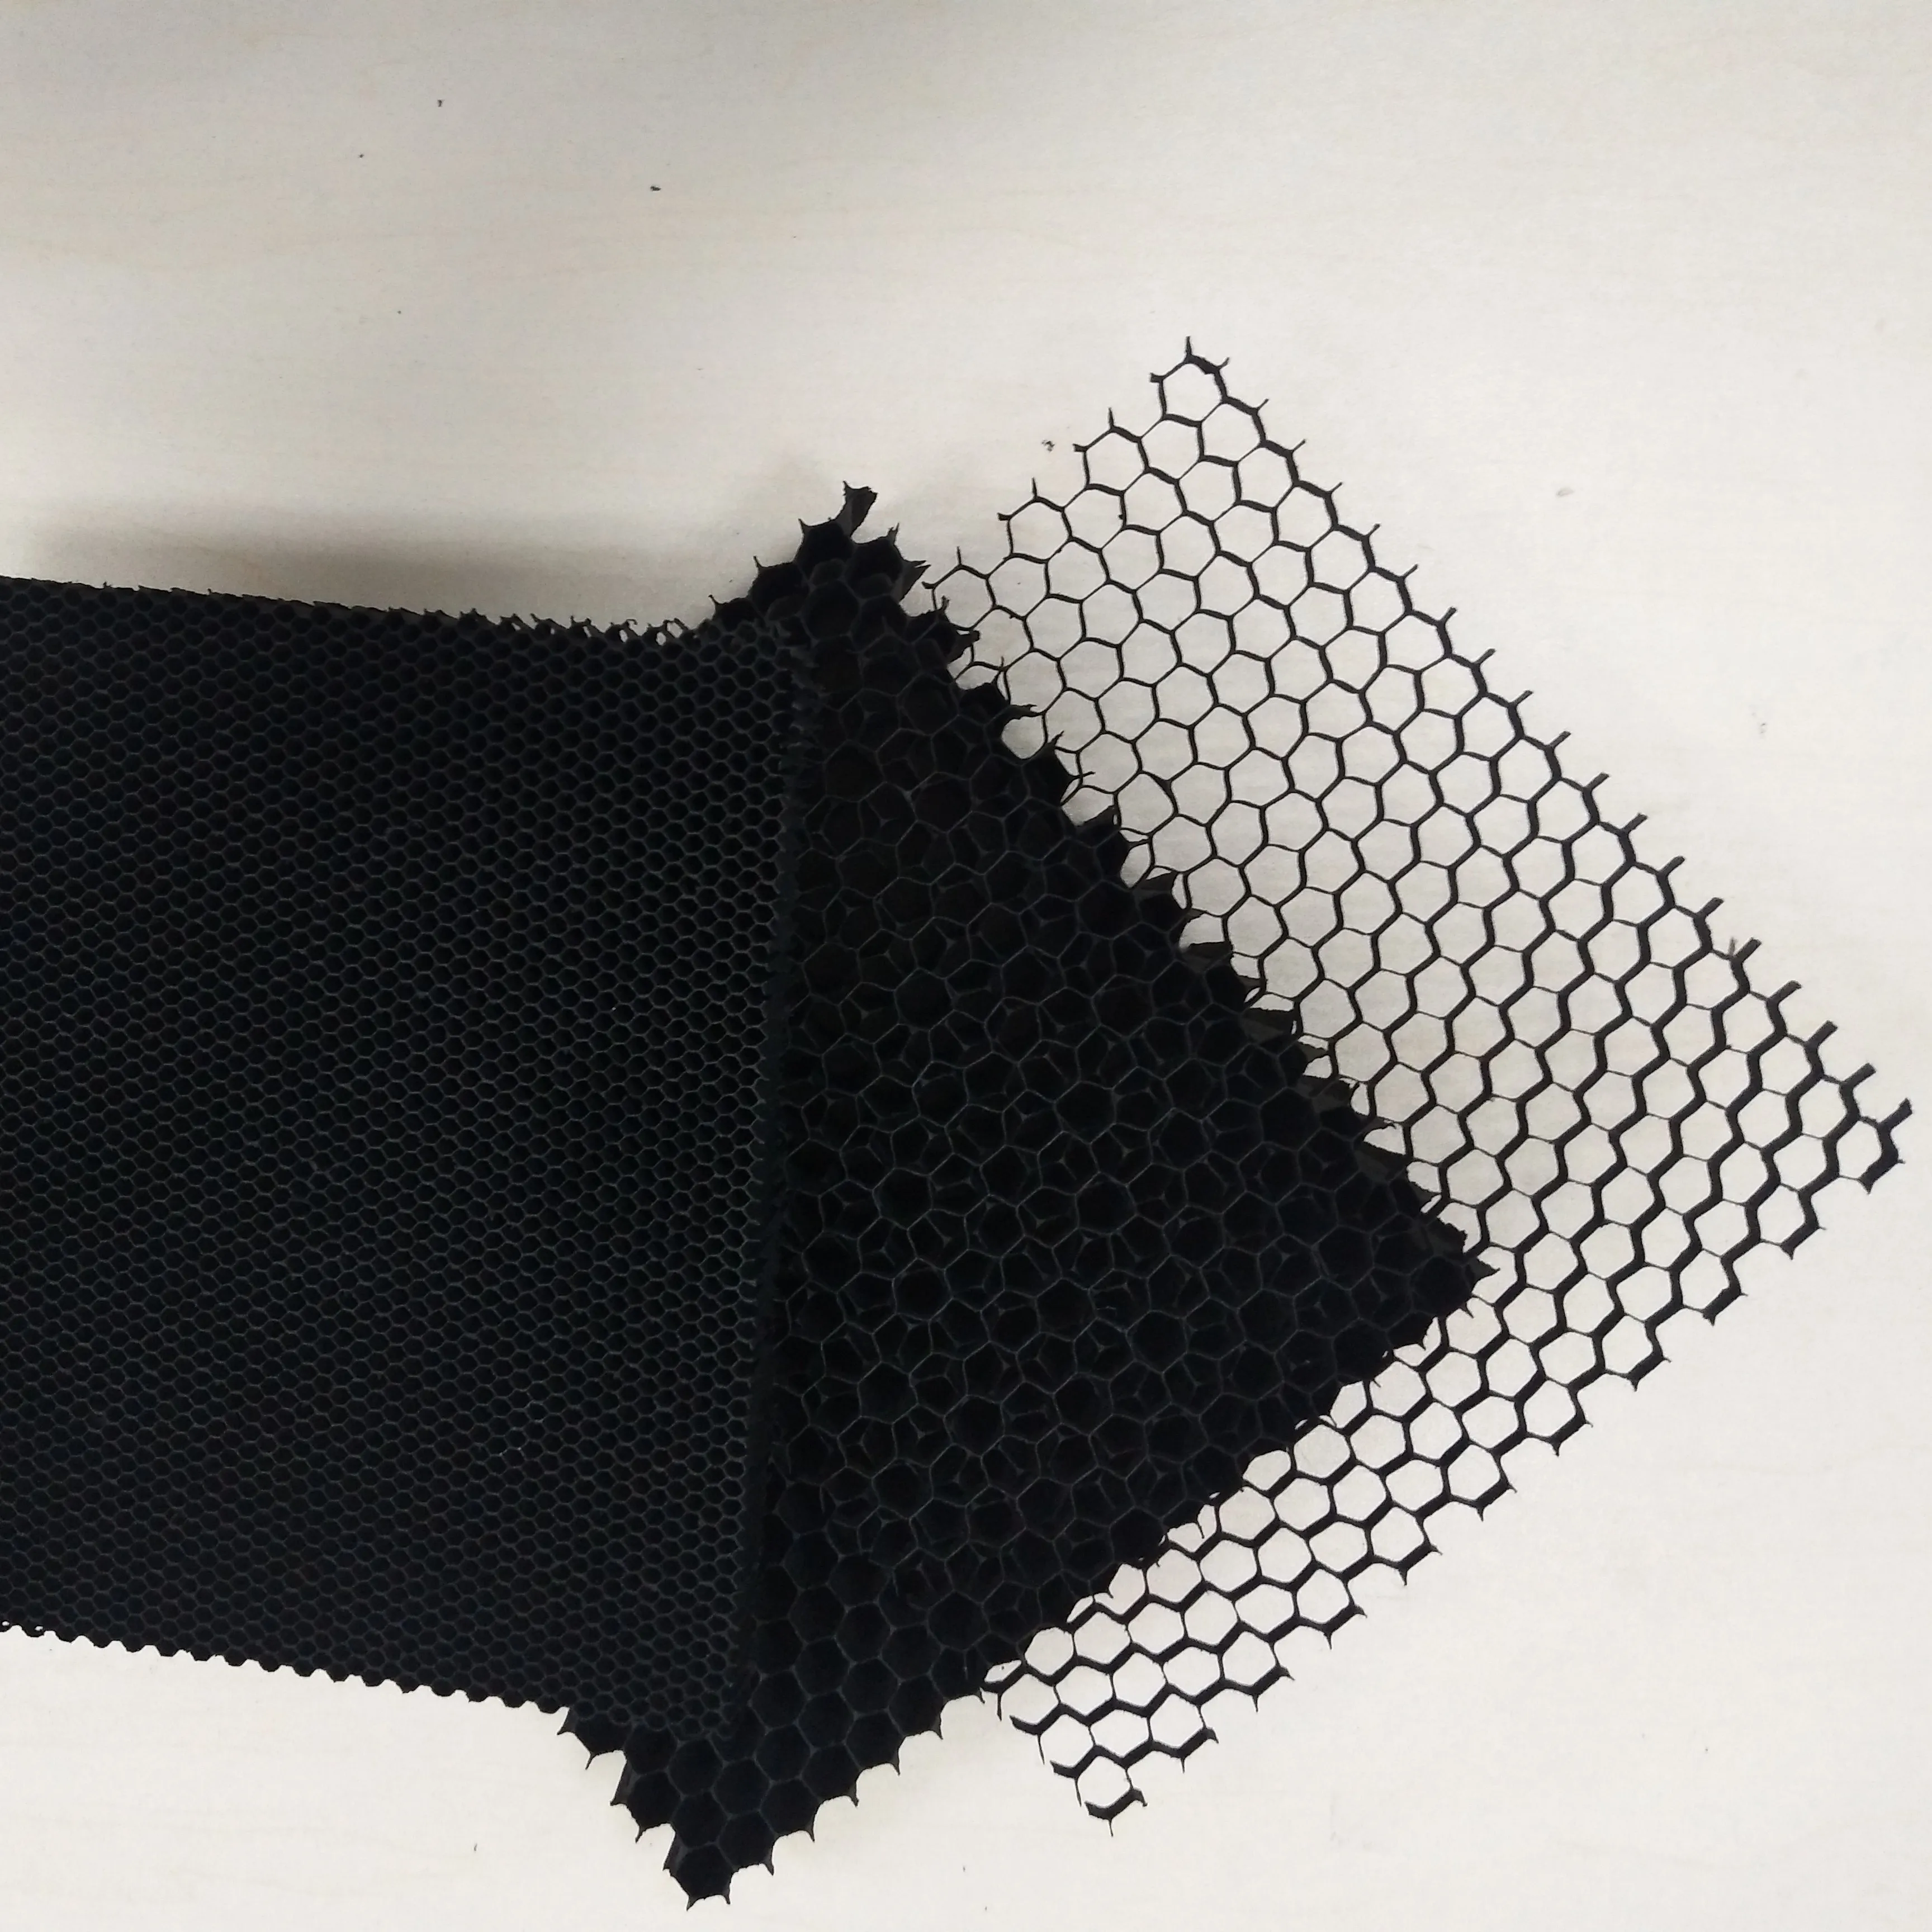 High power capacity honeycomb  absorbers  for microwave anechoic chamber (62460307349)